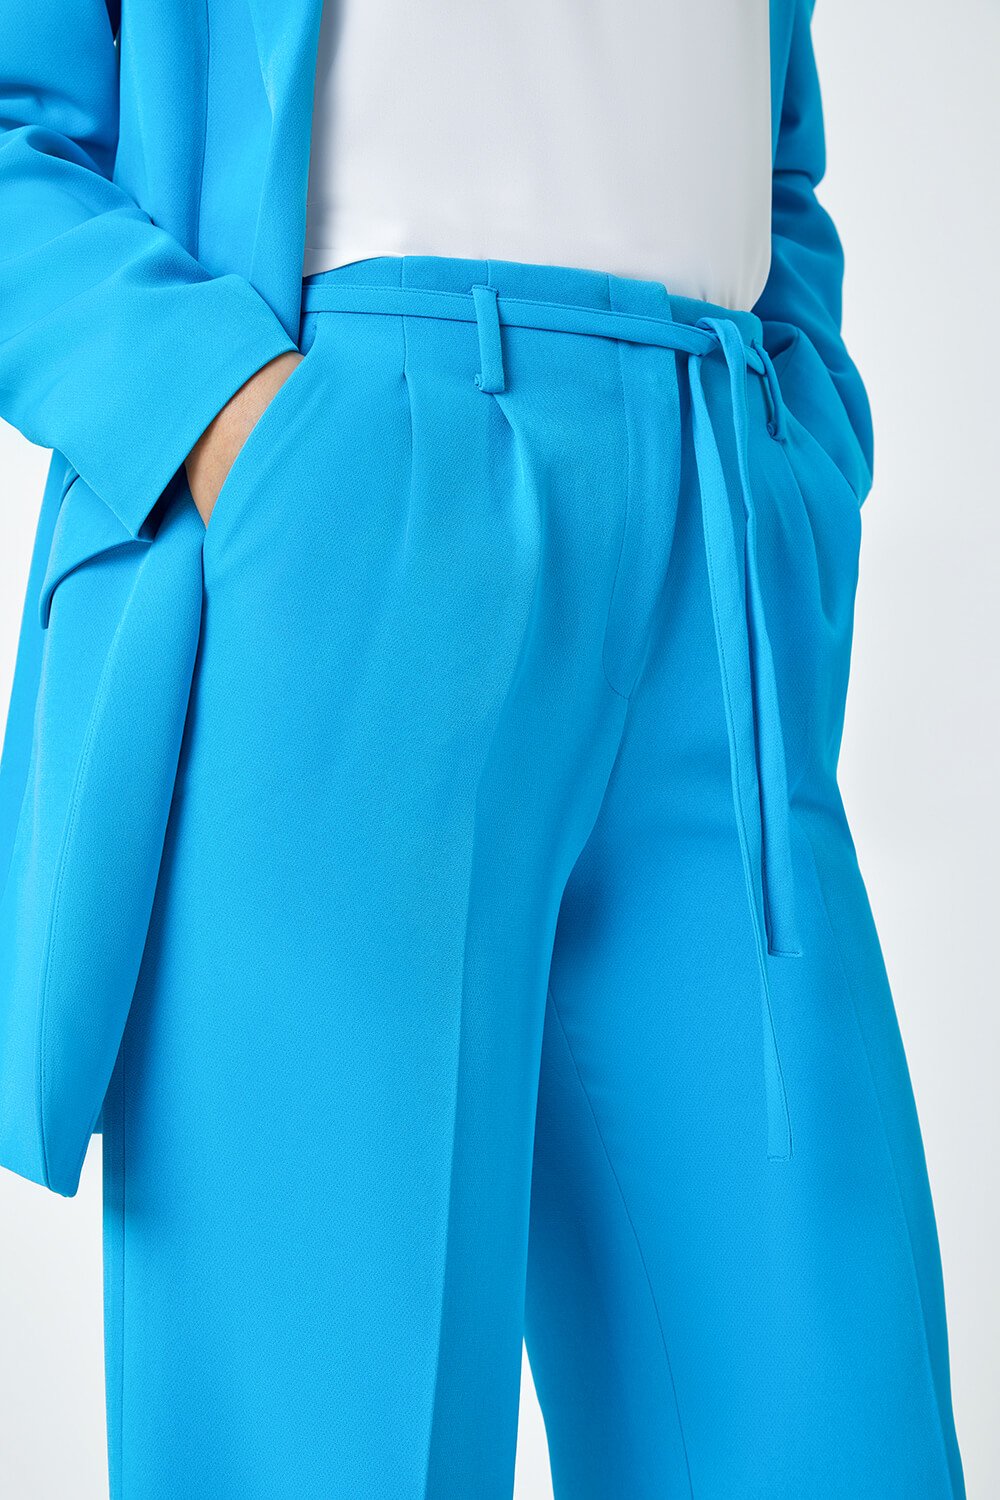 Turquoise Crepe Stretch Straight Leg Trousers, Image 5 of 5